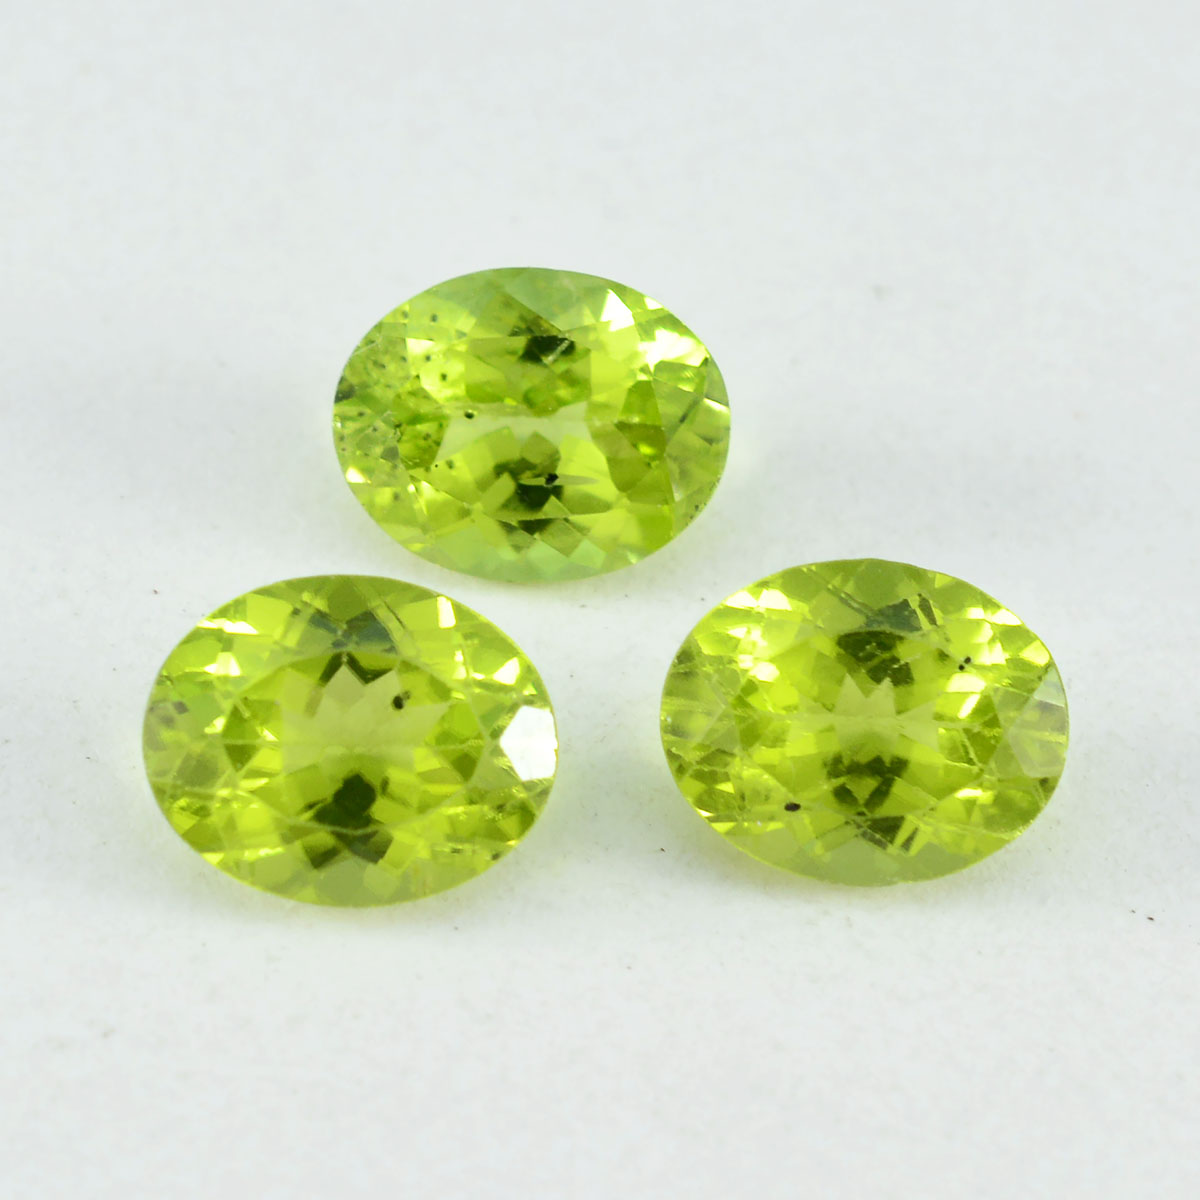 Riyogems 1PC Natural Green Peridot Faceted 9x11 mm Oval Shape excellent Quality Gemstone